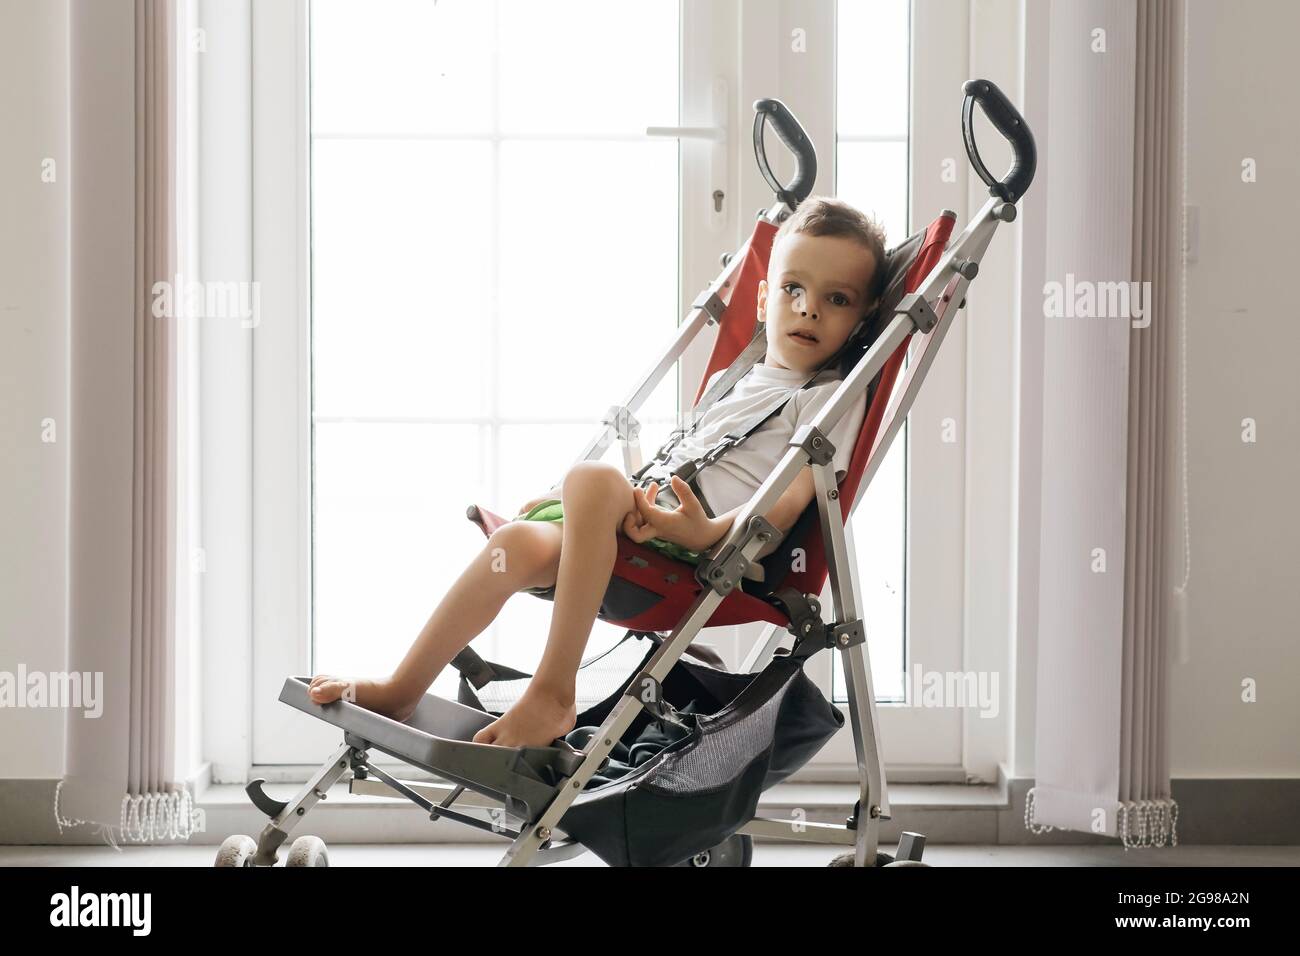 Boy with with Cerebral Palsy in special chair going outside by the door. Accessibility for disabled people in prams. Stock Photo